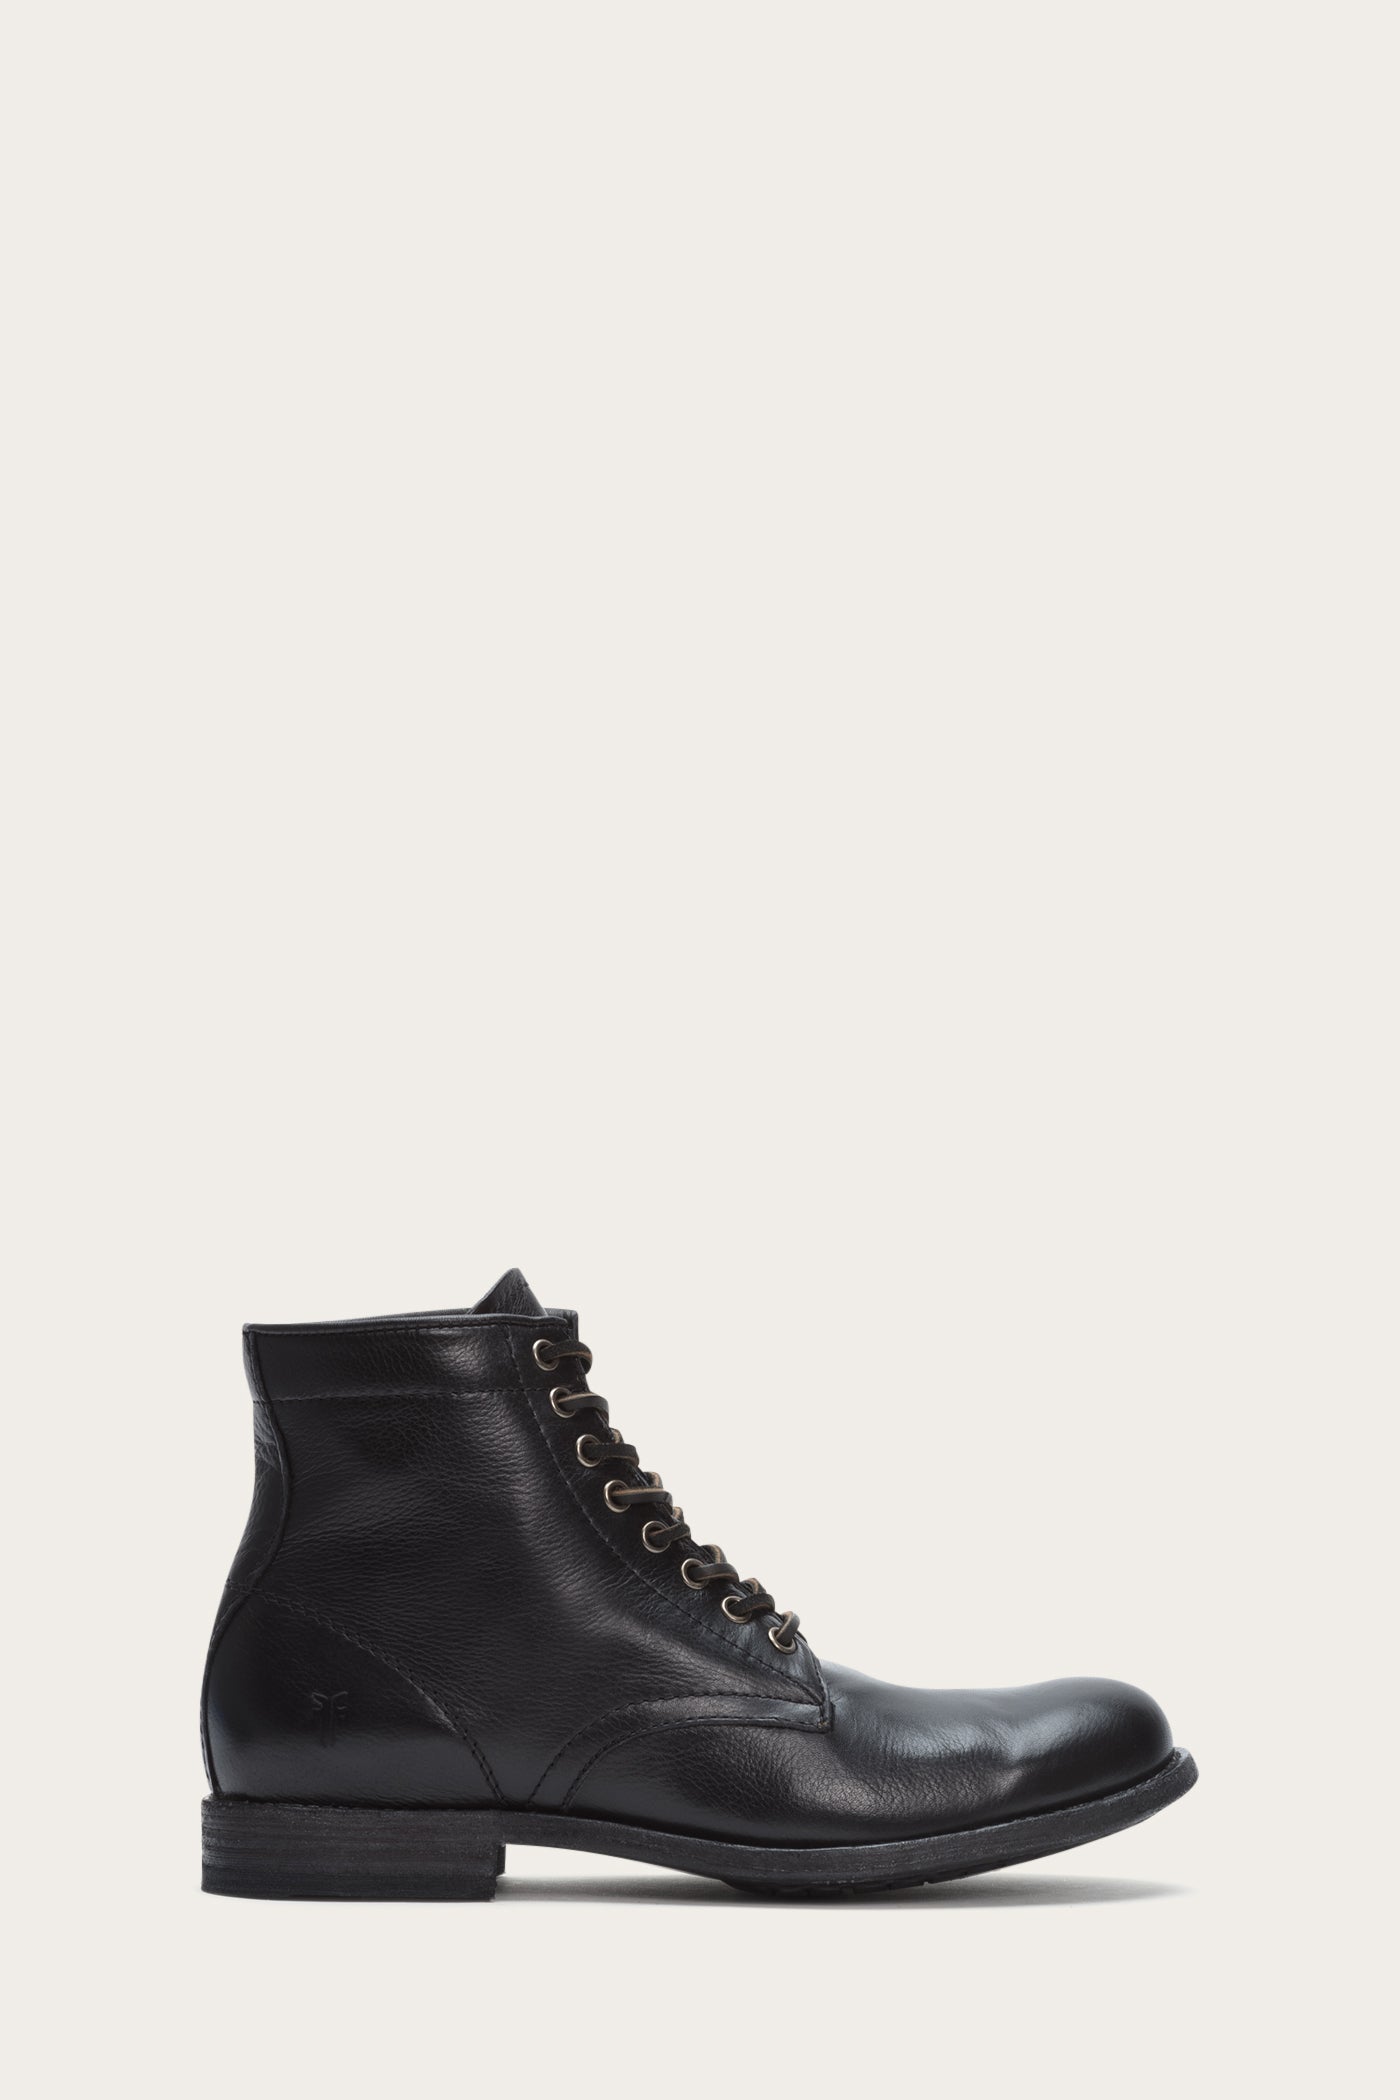 Leather Boots, Shoes \u0026 Bags | FRYE 